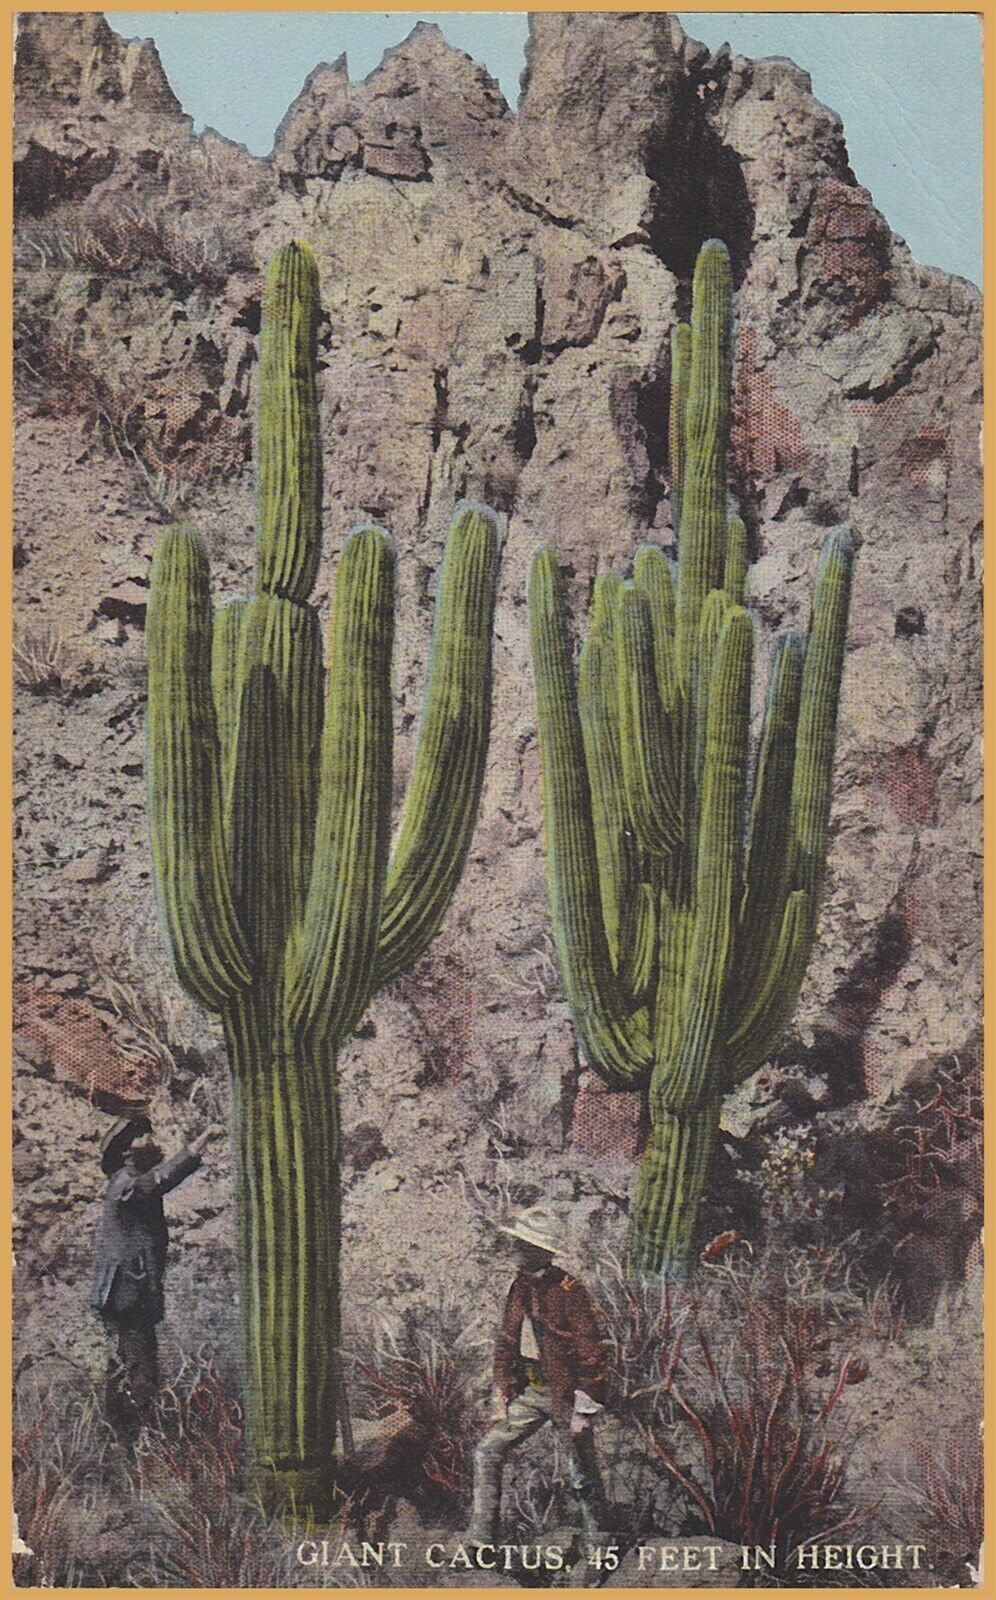 Giant Cactus, 15 feet in height - 1921